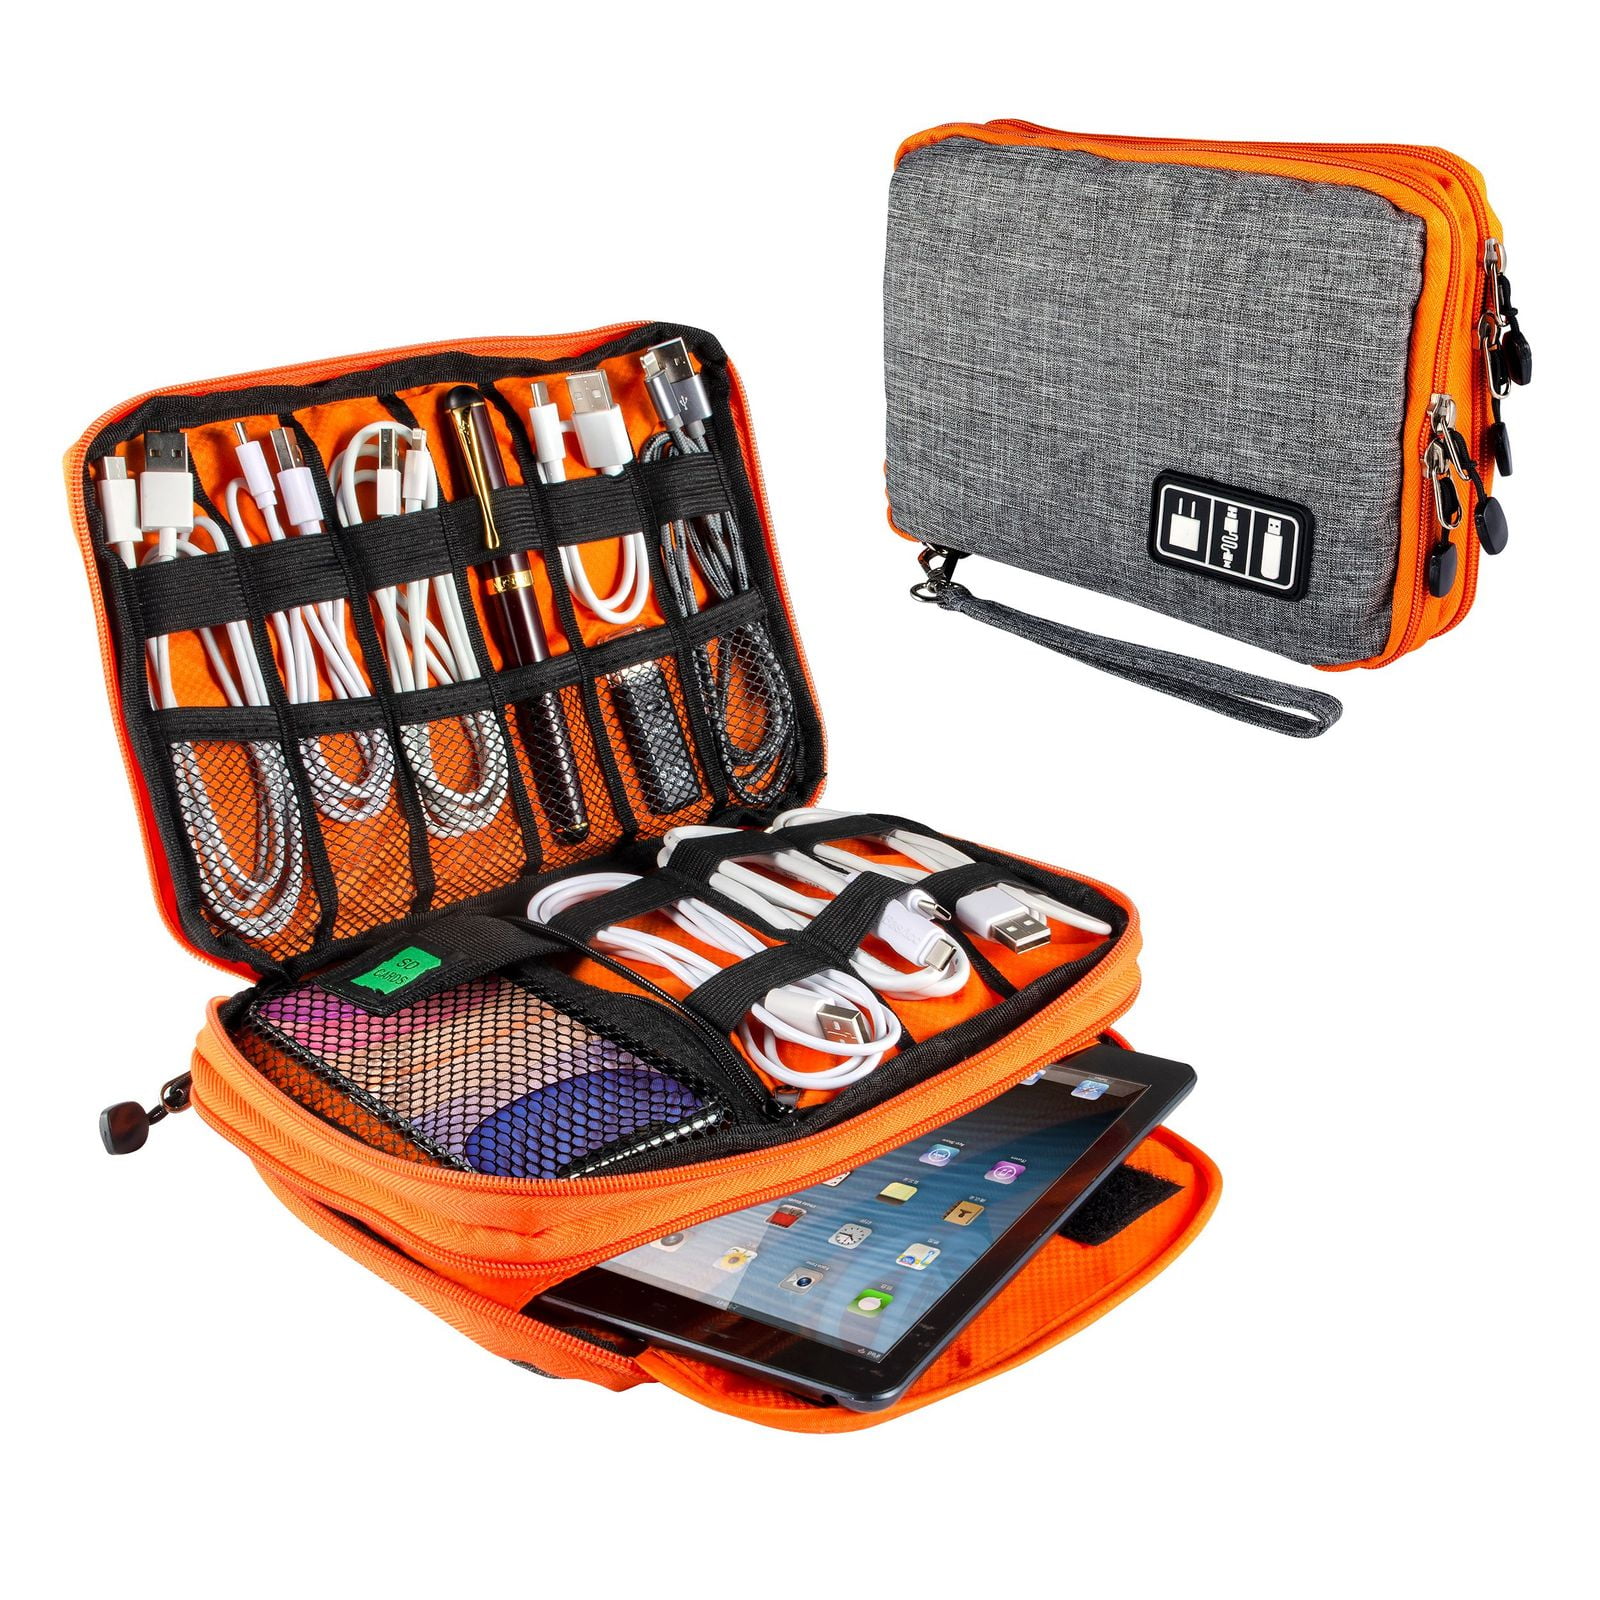 Cable organizer bag Electronic Accessories Bag Travel Electronics Organiser Cables Case for Power Bank Ipad and Memory Card Camera